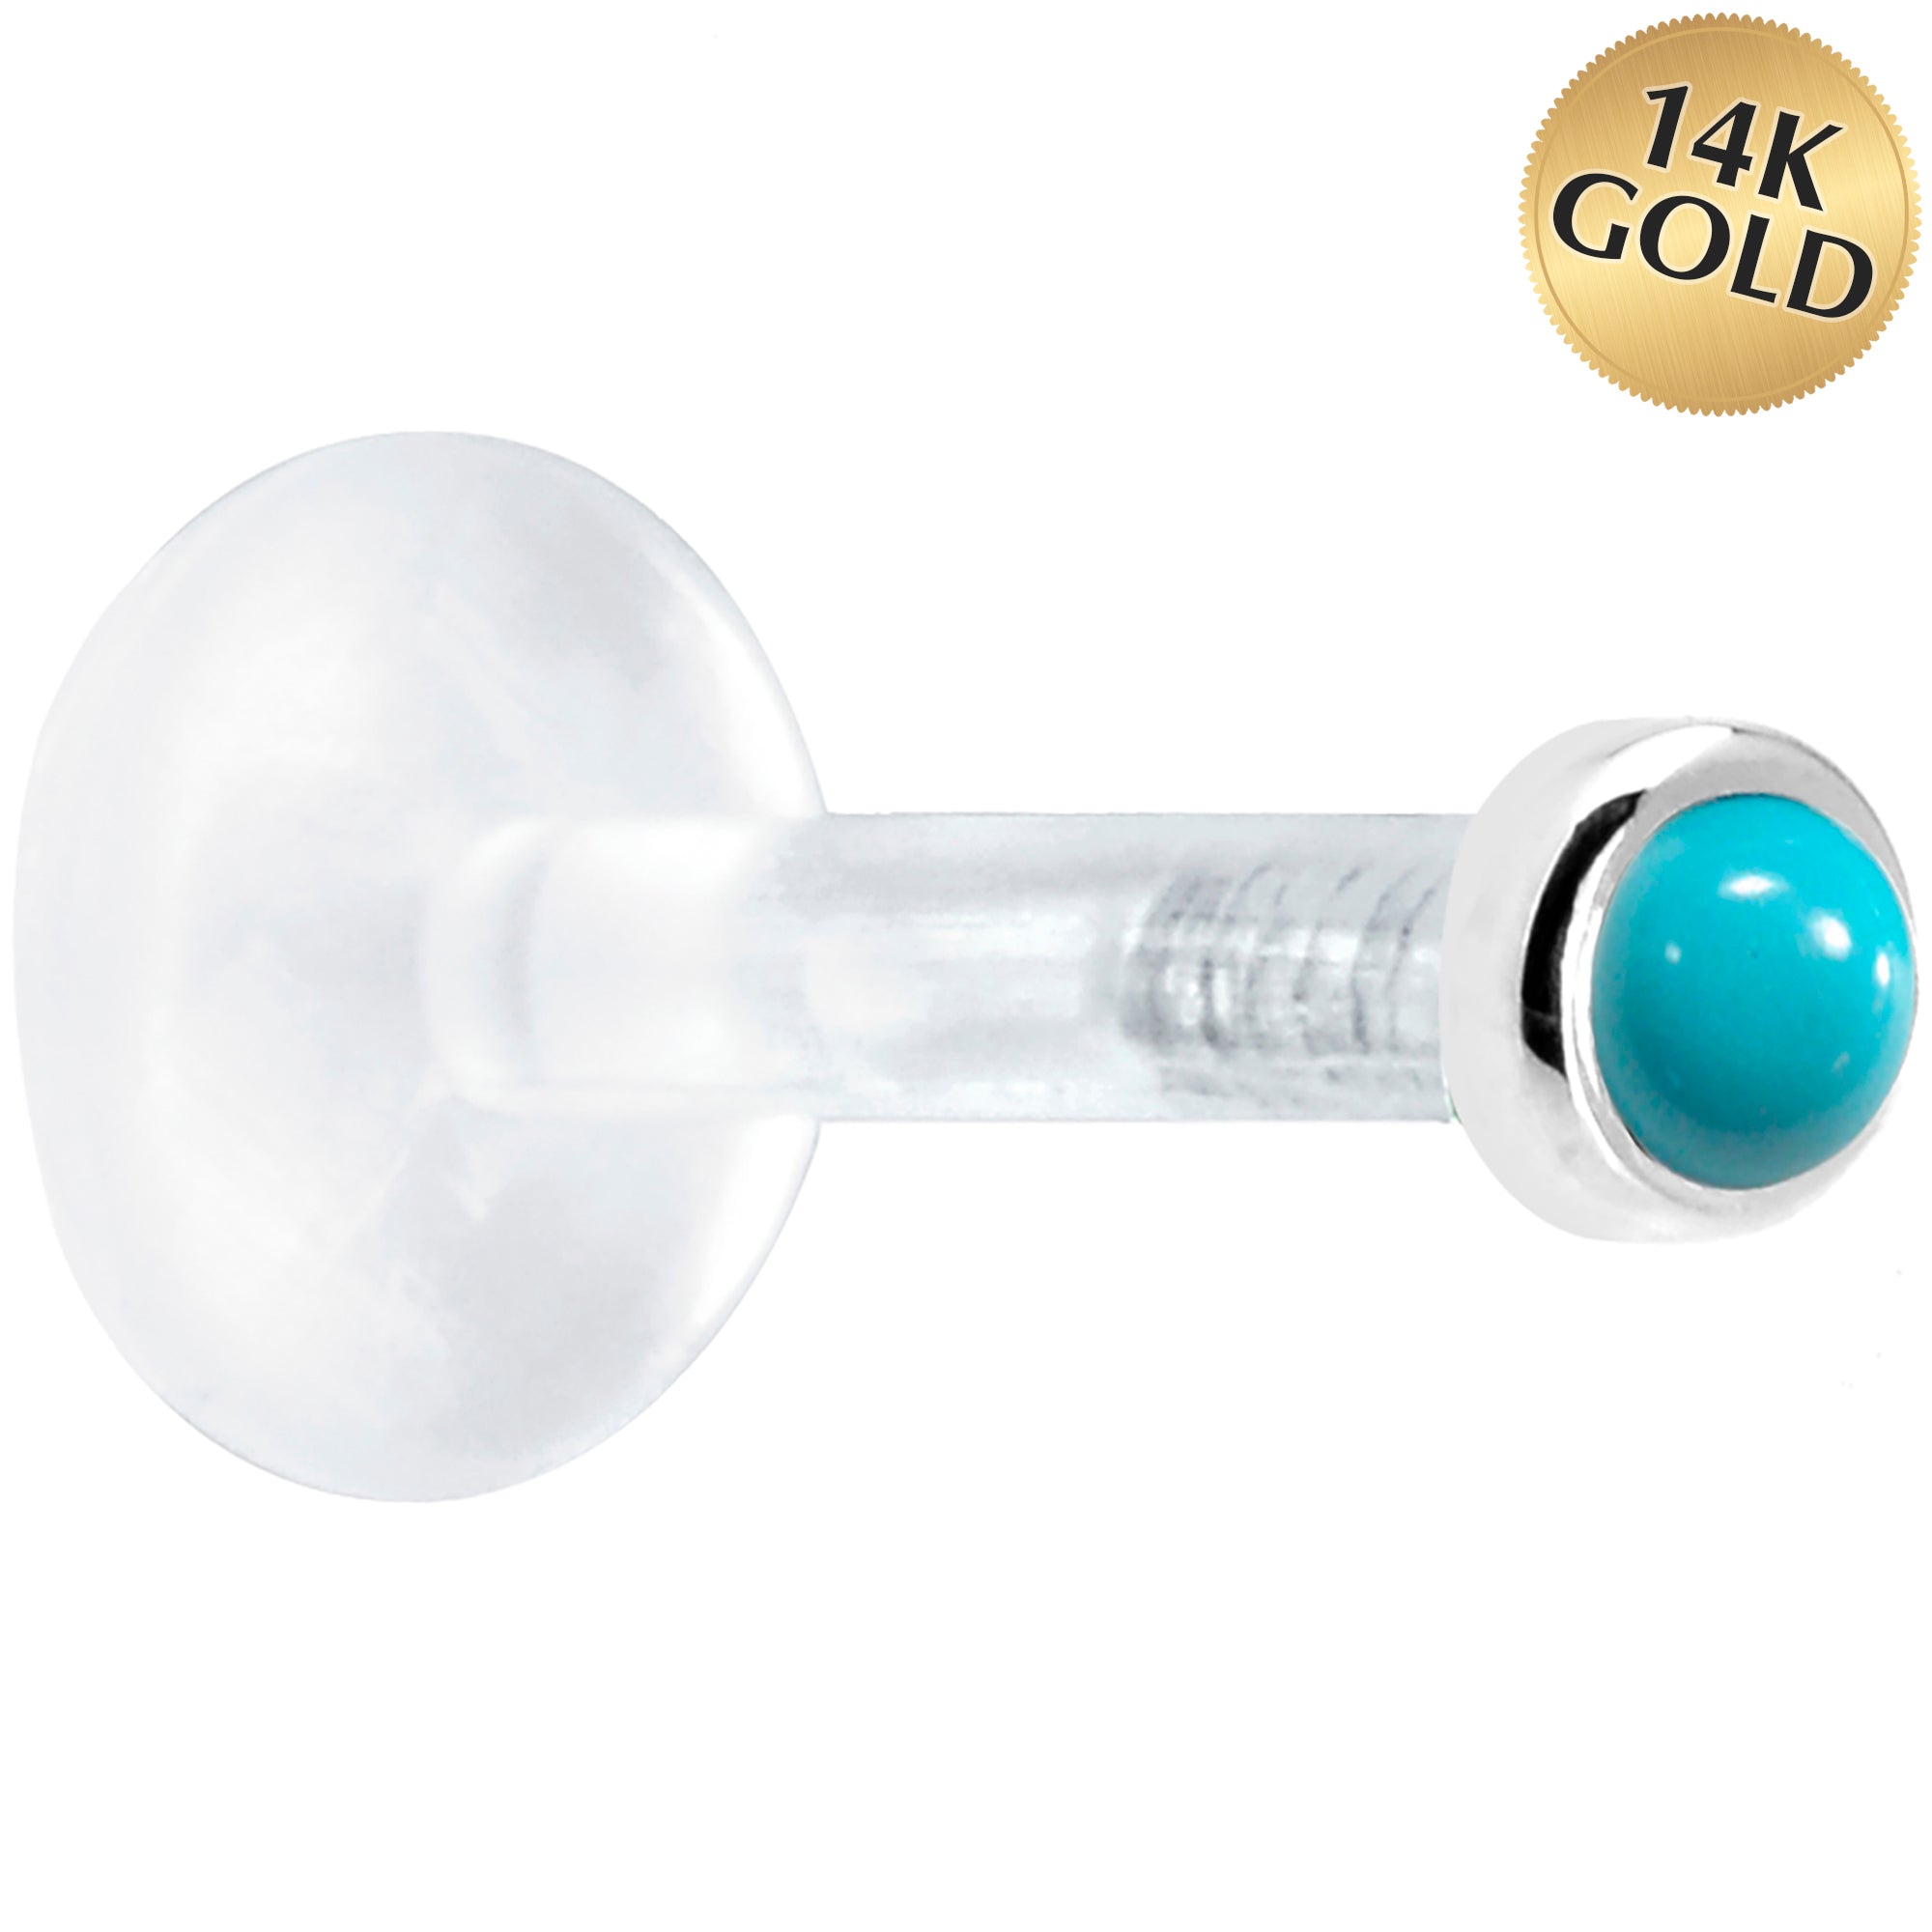 Solid 14KT White Gold 2mm Genuine Turquoise Bioplast Push in Labret